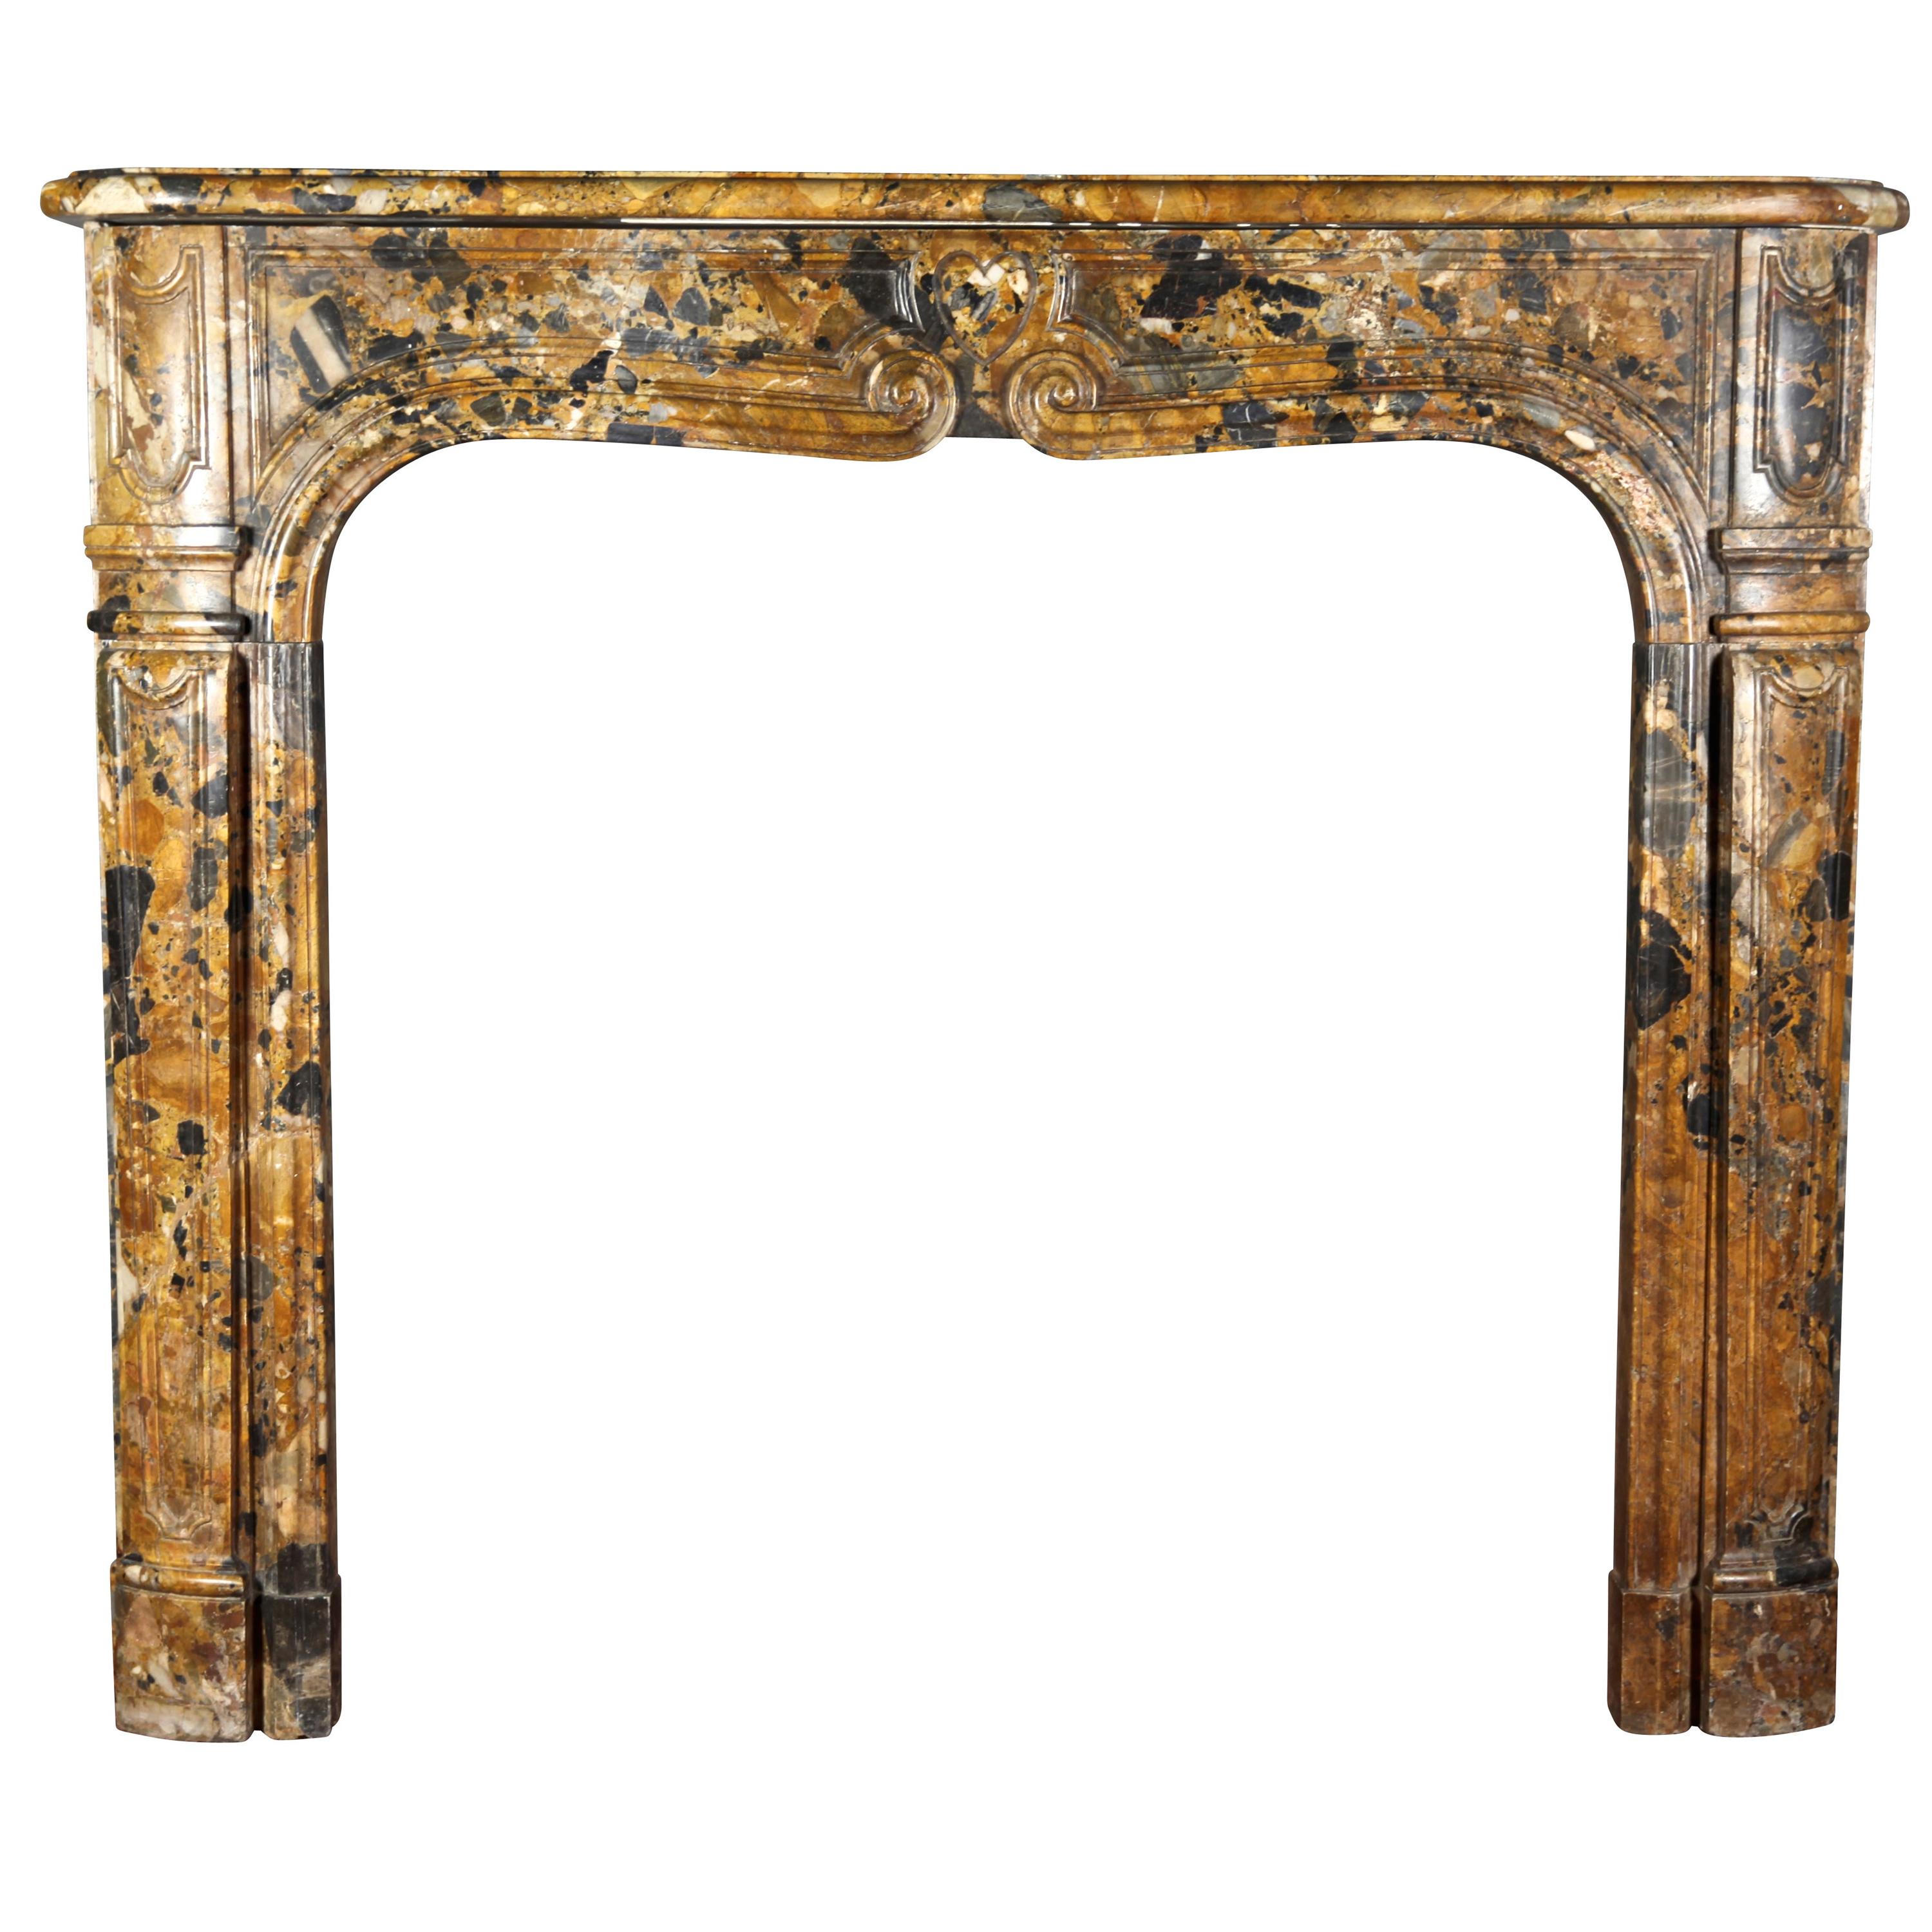 Petite Italian antique chimney piece is in Royal Brêche marble and has its original patina. The front has a heart motif. This particular is a 